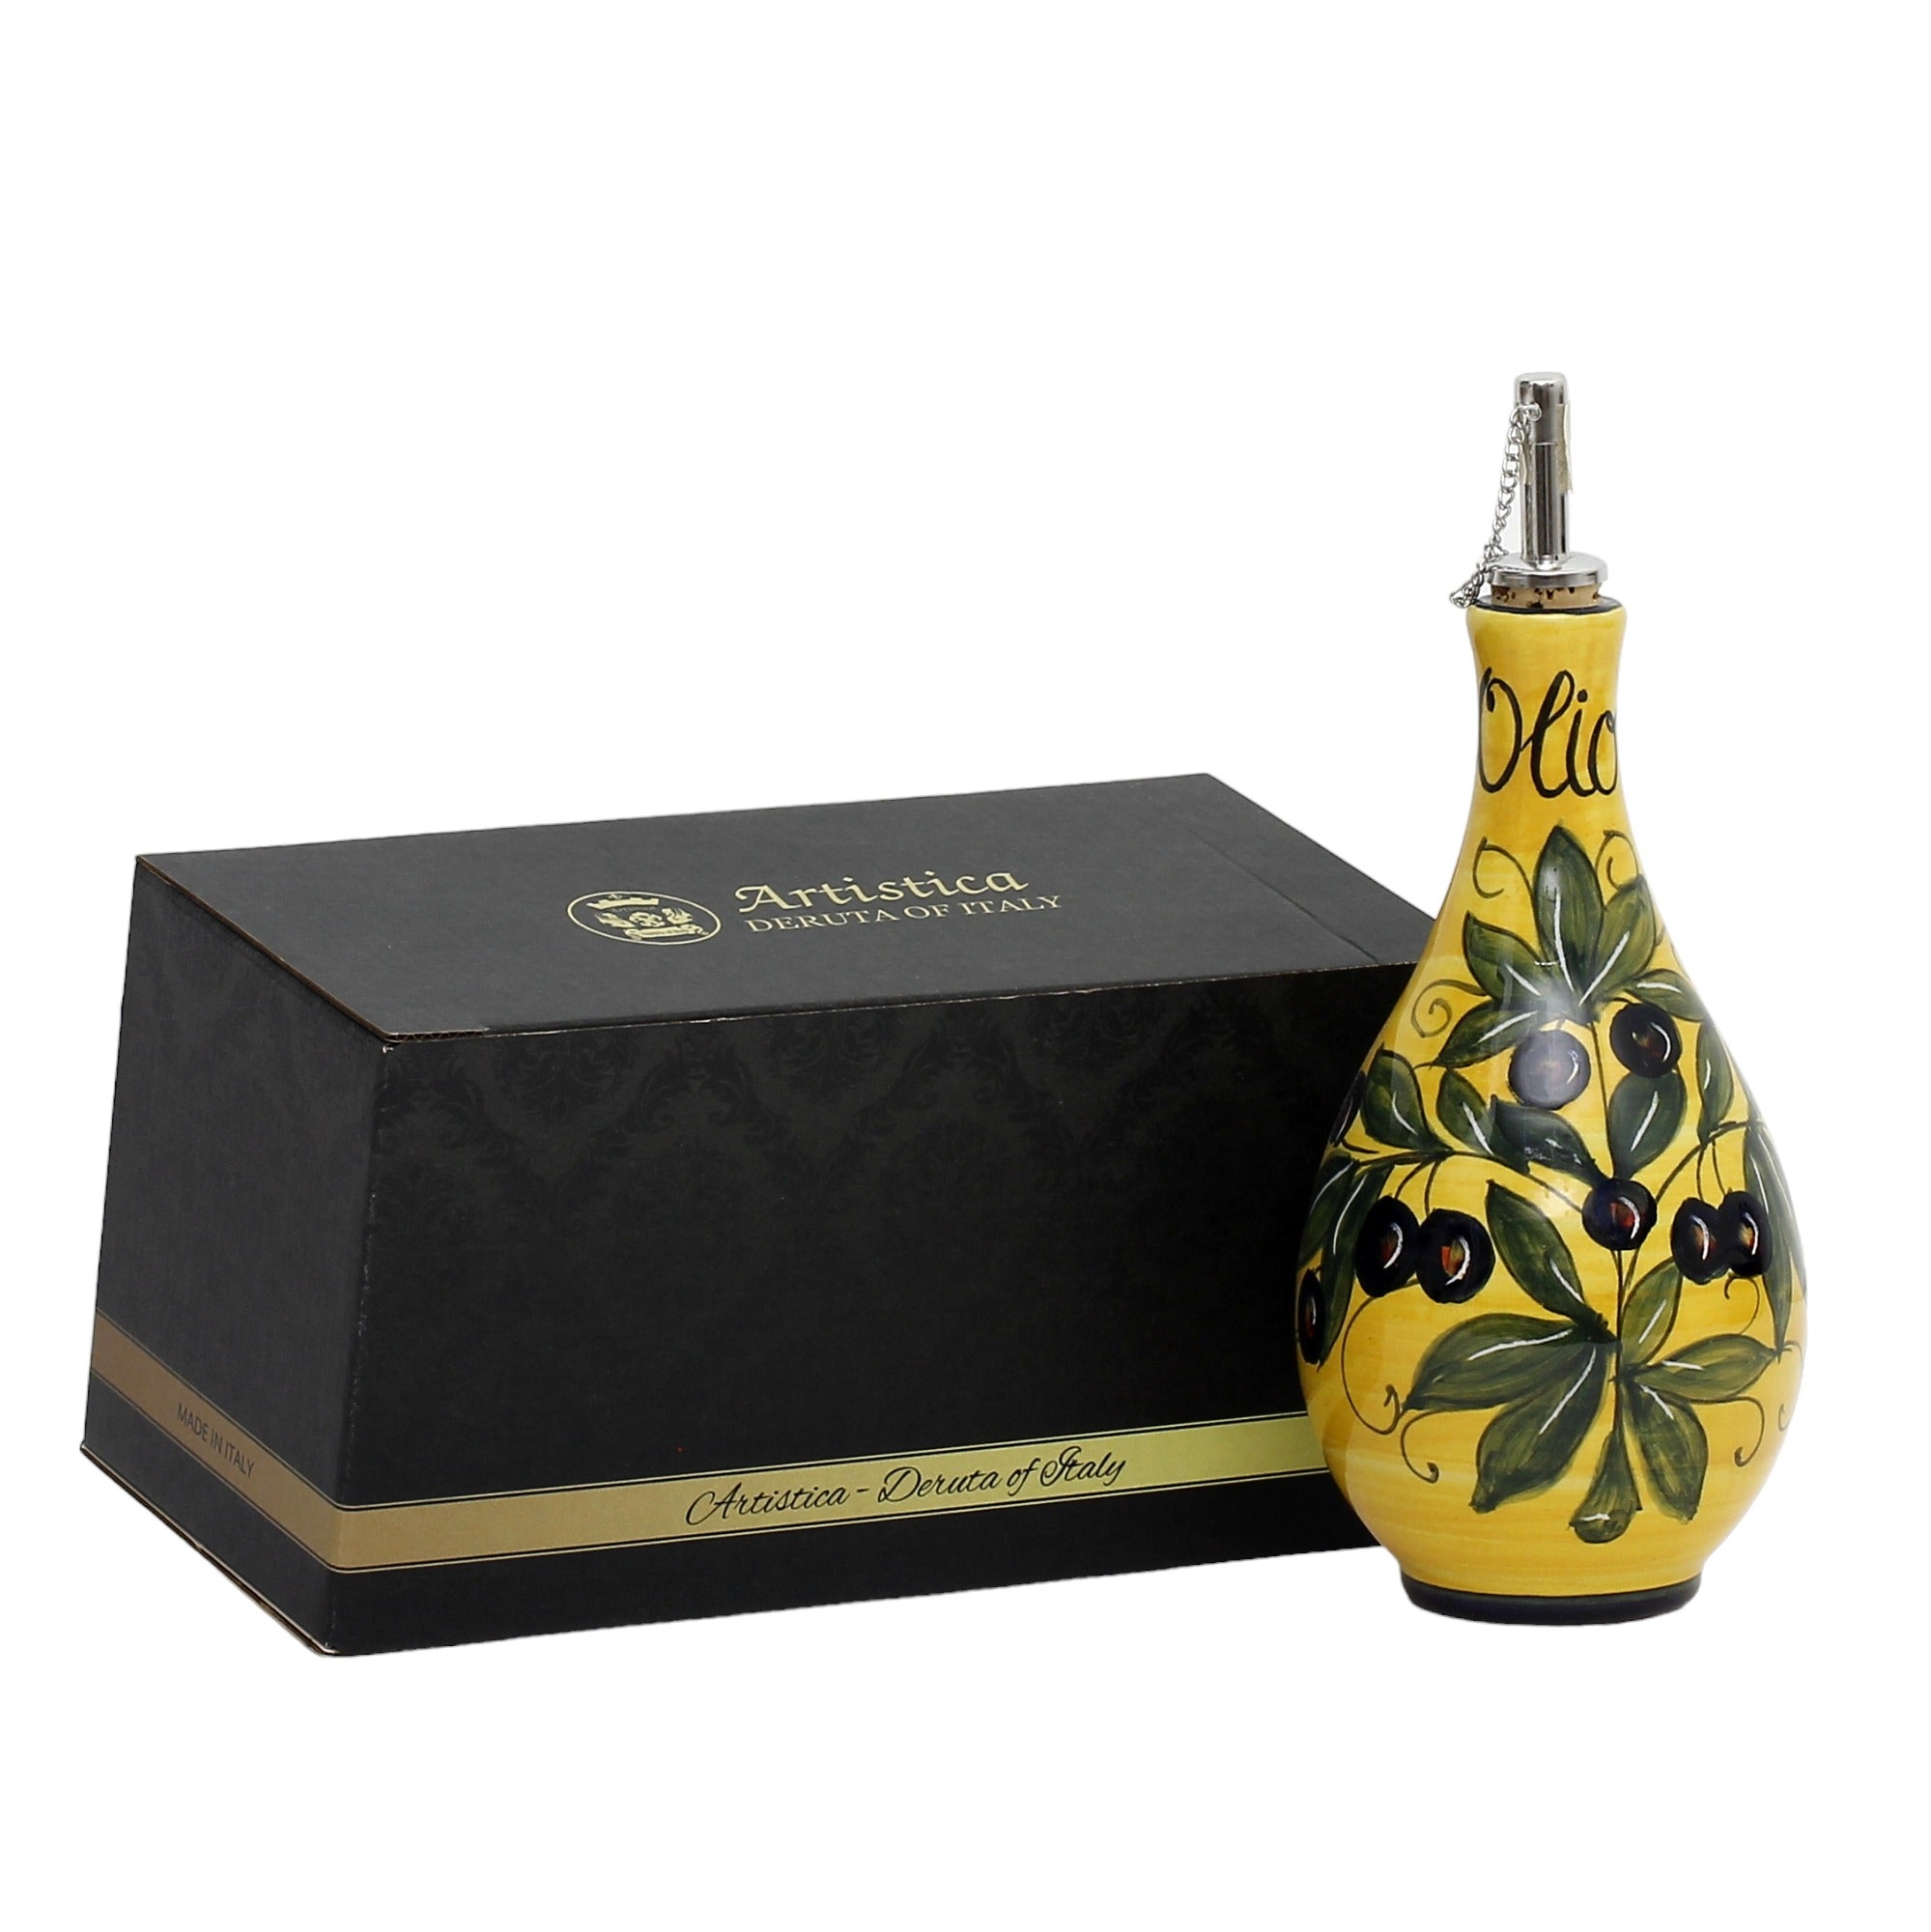 GIFT BOX: With authentic Deruta hand painted ceramic - 'OLIO' Bottle D 